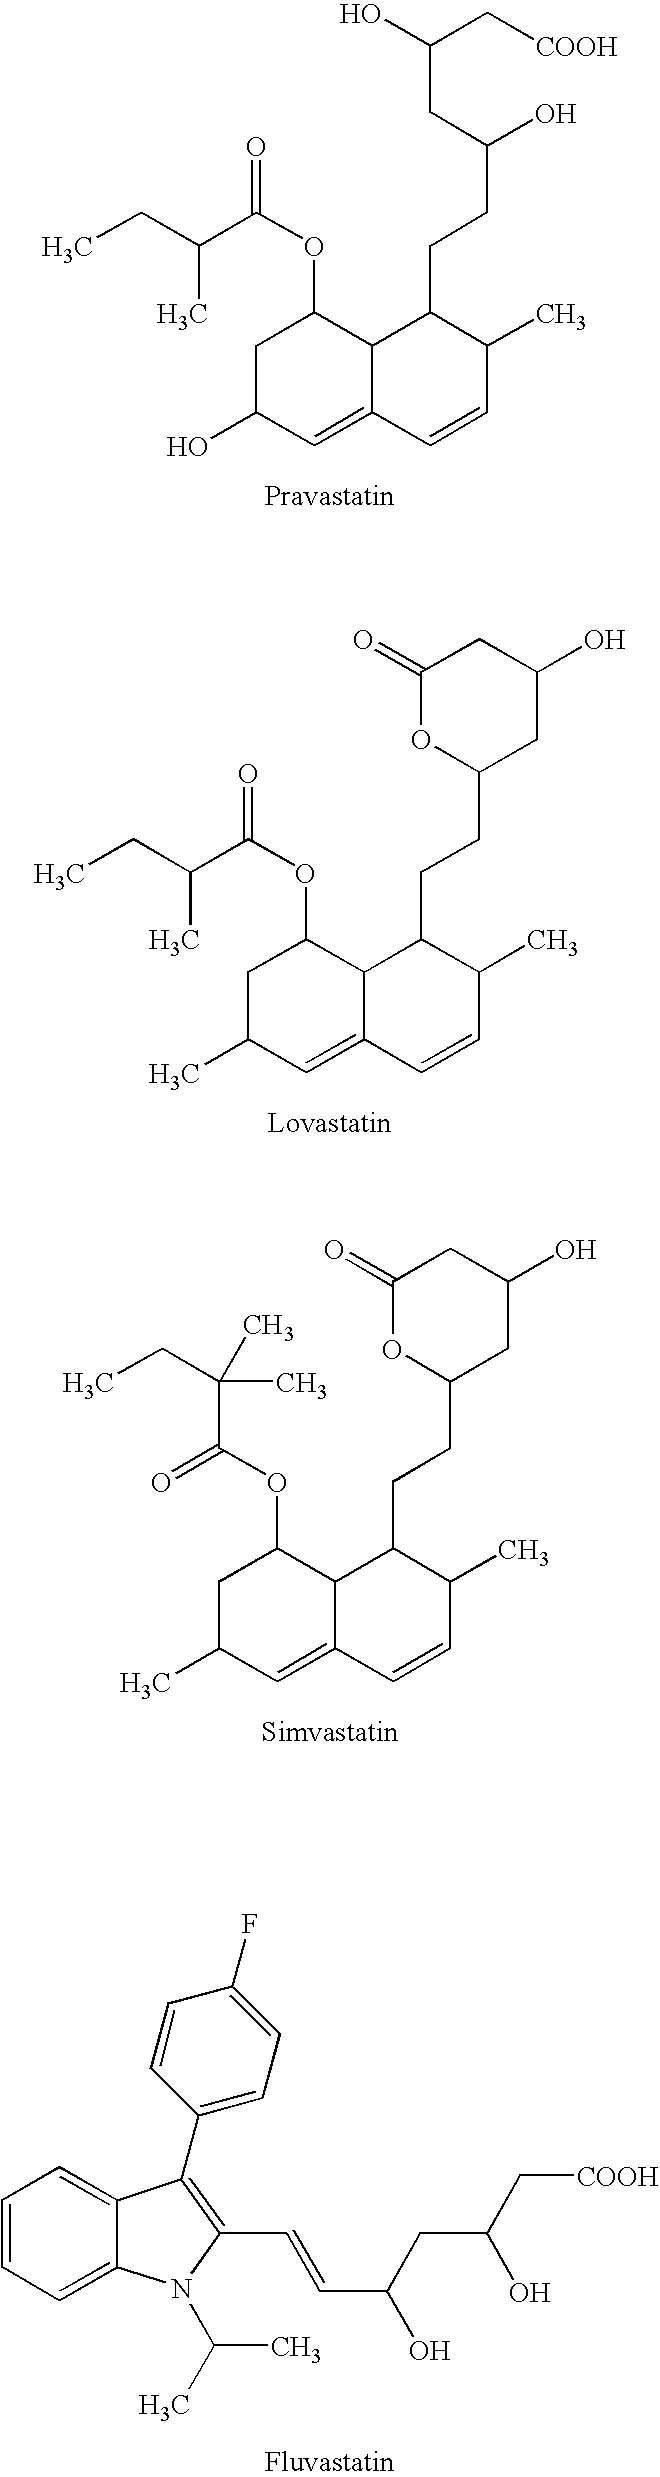 Medicinal composition containing an HMG-CoA reductase inhibitor